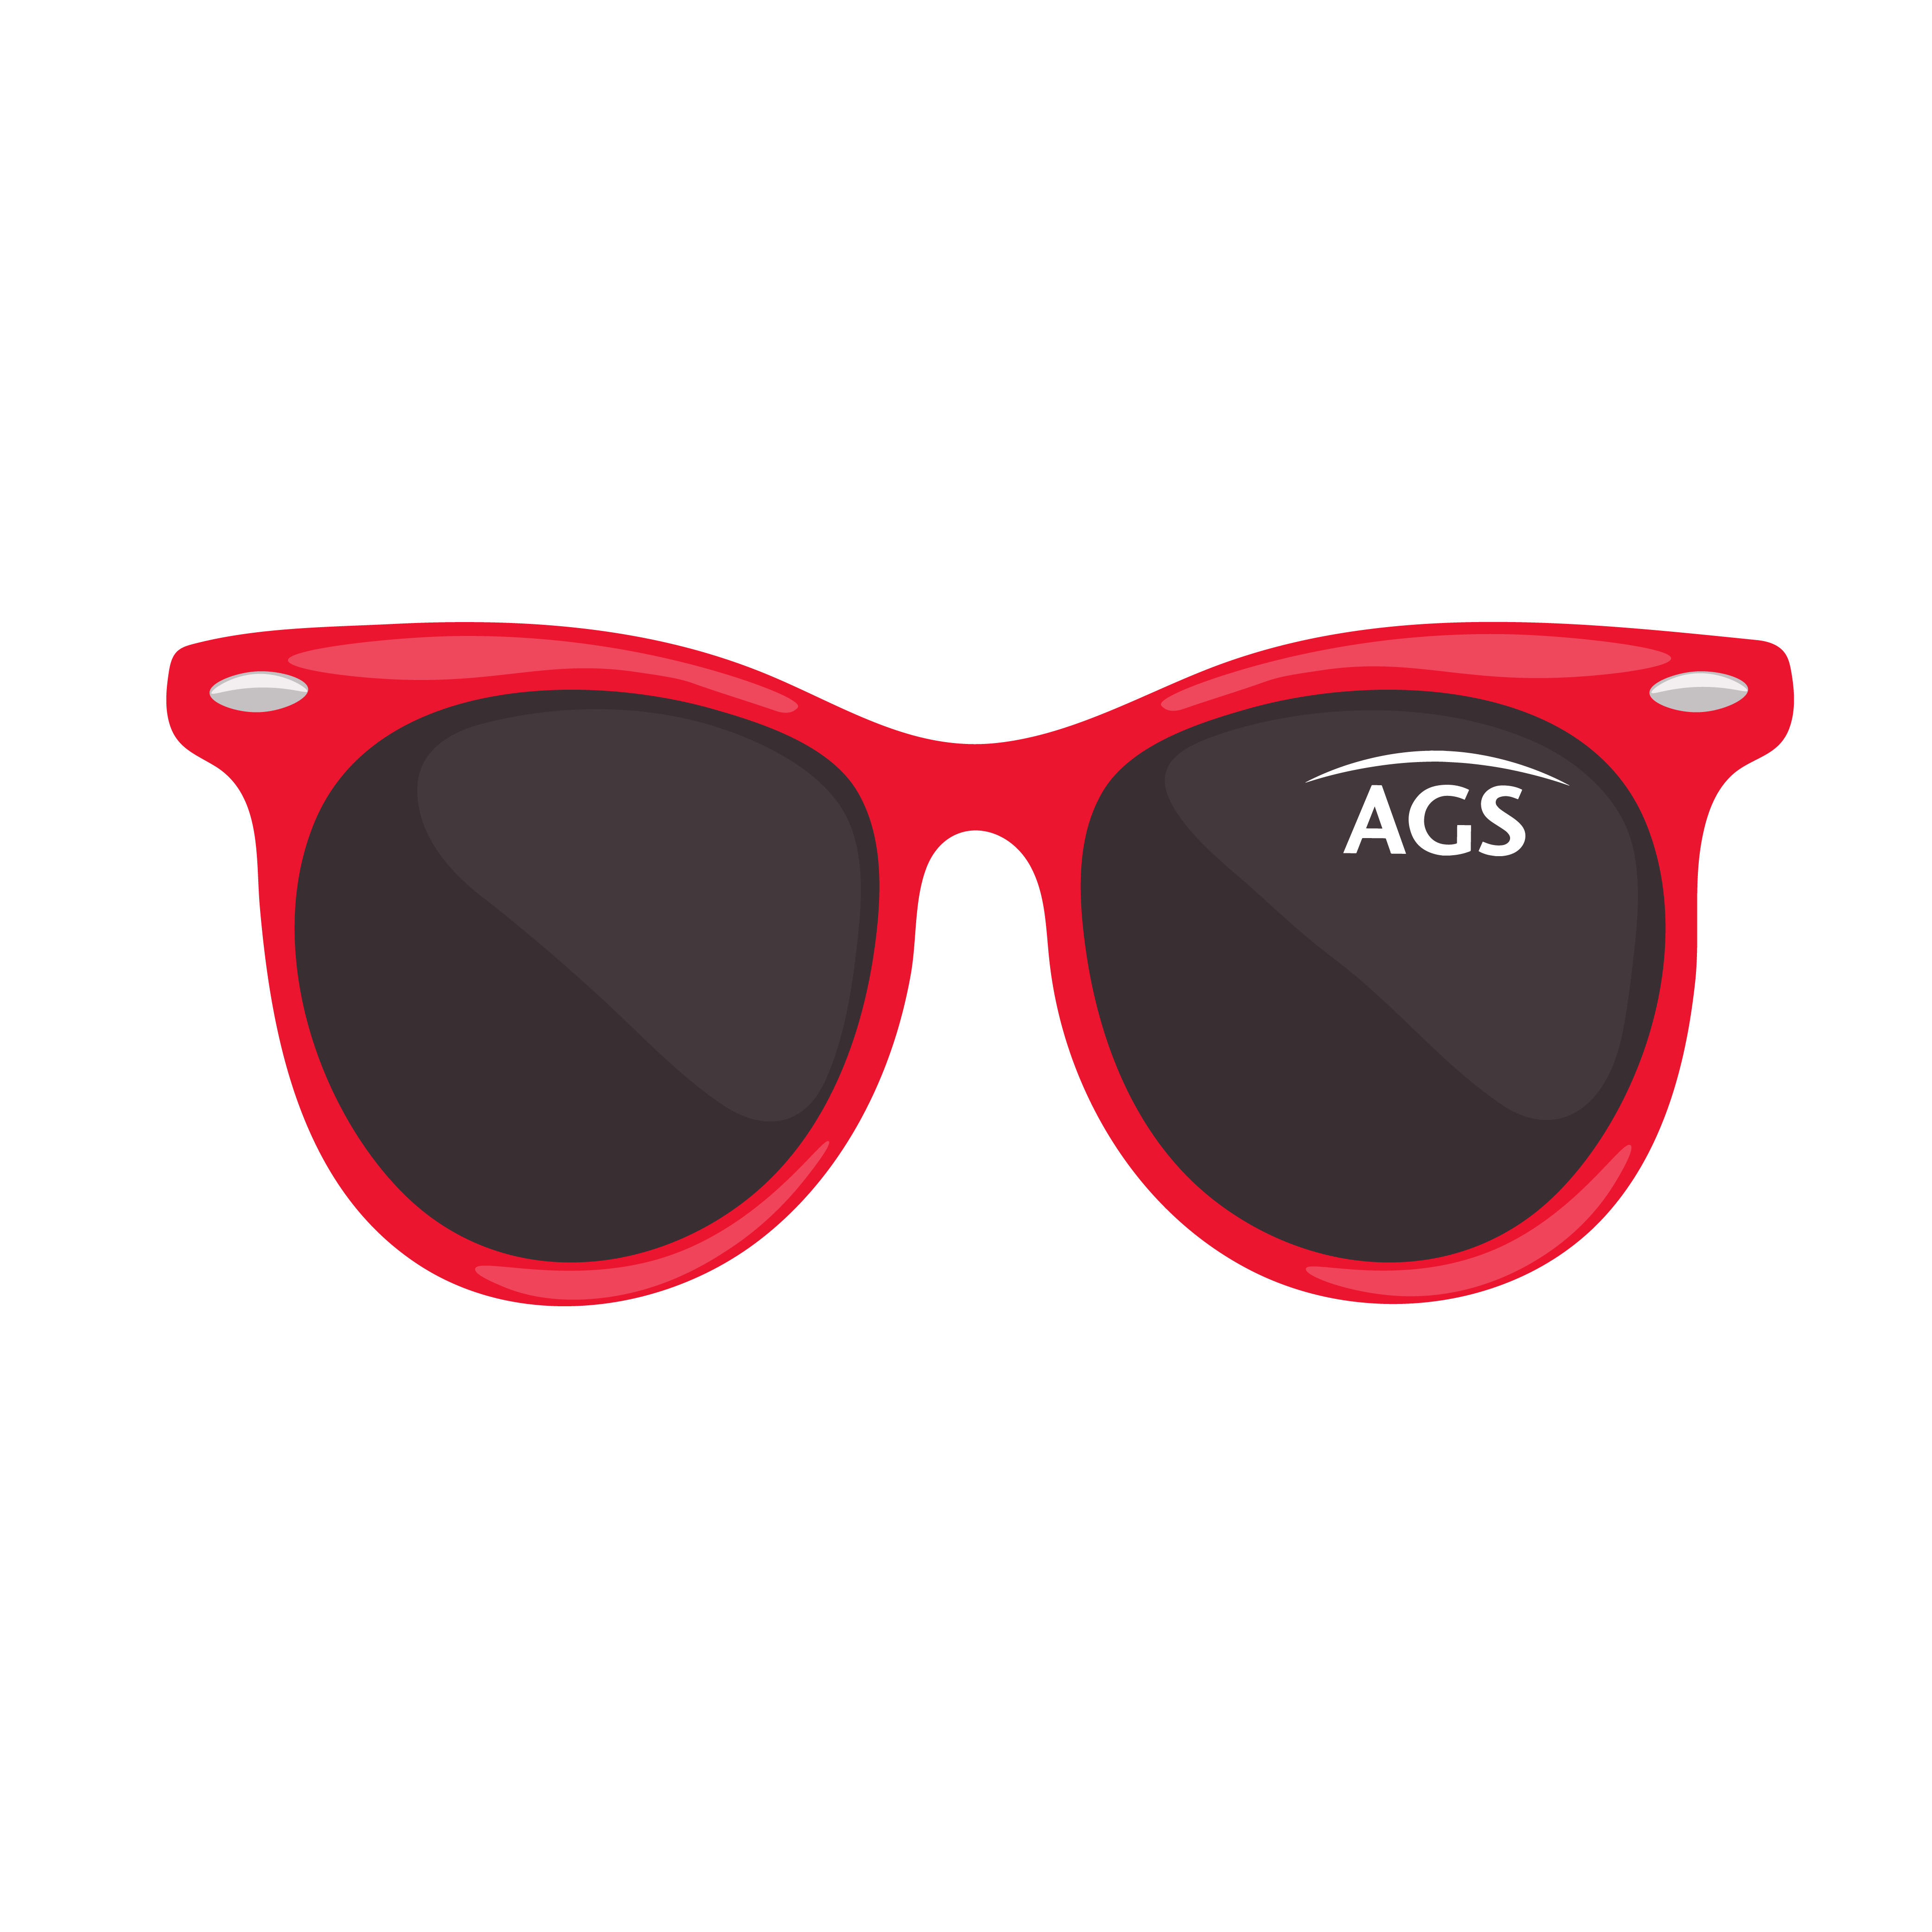 Red AGS sunglasses